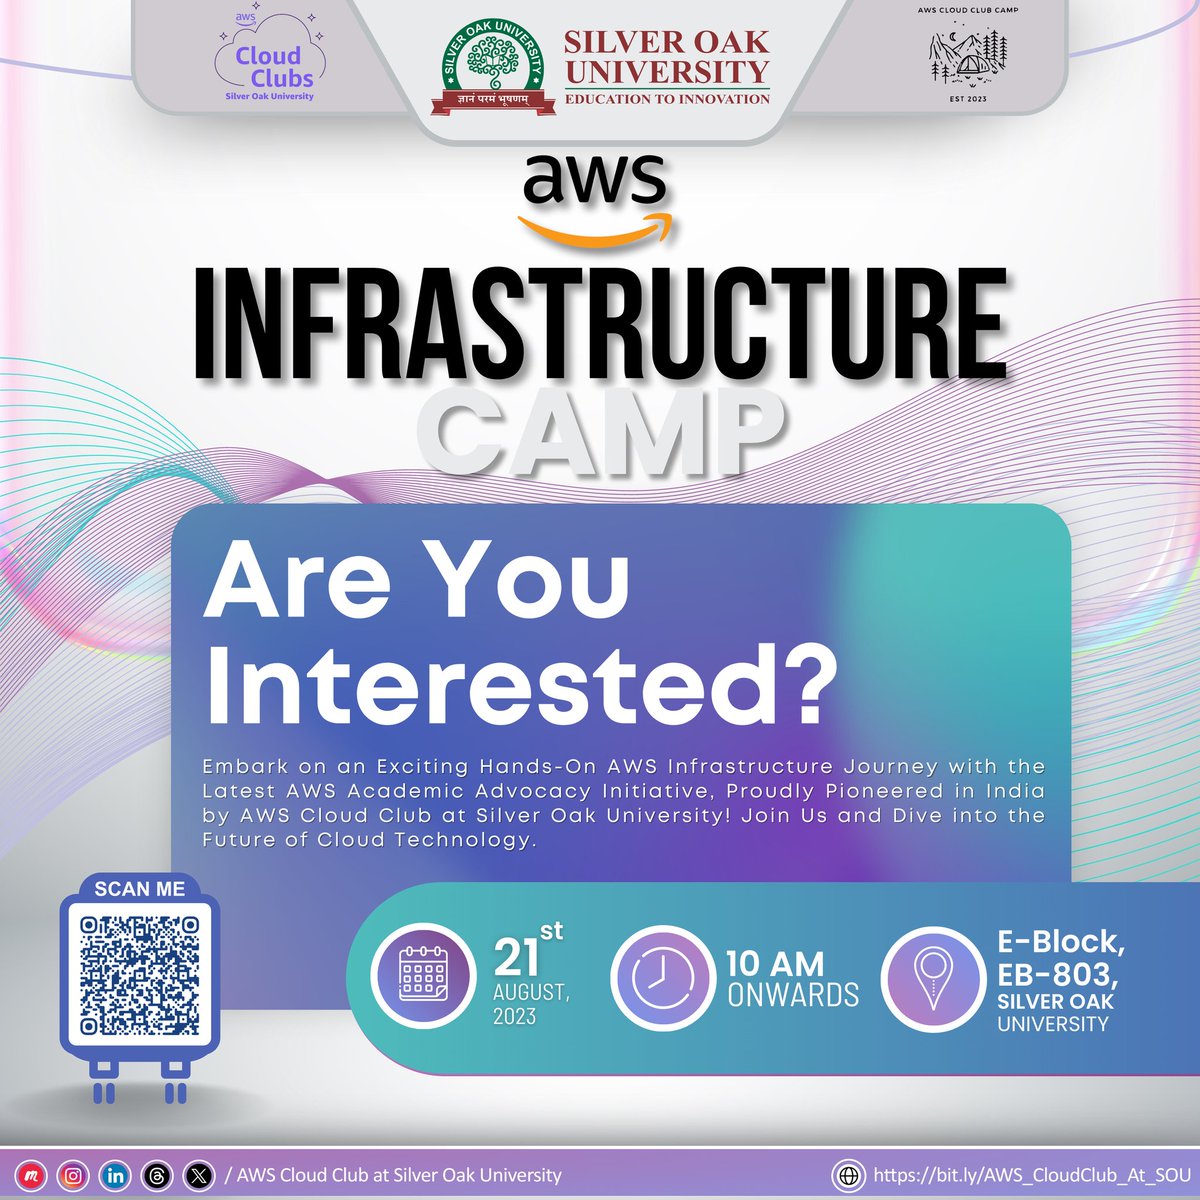 Exciting news, Cloud Enthusiasts! 🌐 Join us for the 'Infrastructure Camp' on Aug 21, 10:00 AM at EB-803, Silver Oak University. Dive into AWS Cloud tech and connect with fellow enthusiasts. Register at:forms.gle/dAvr8GYrh926S8… #AWSCloudCamp #SilverOakUniversity